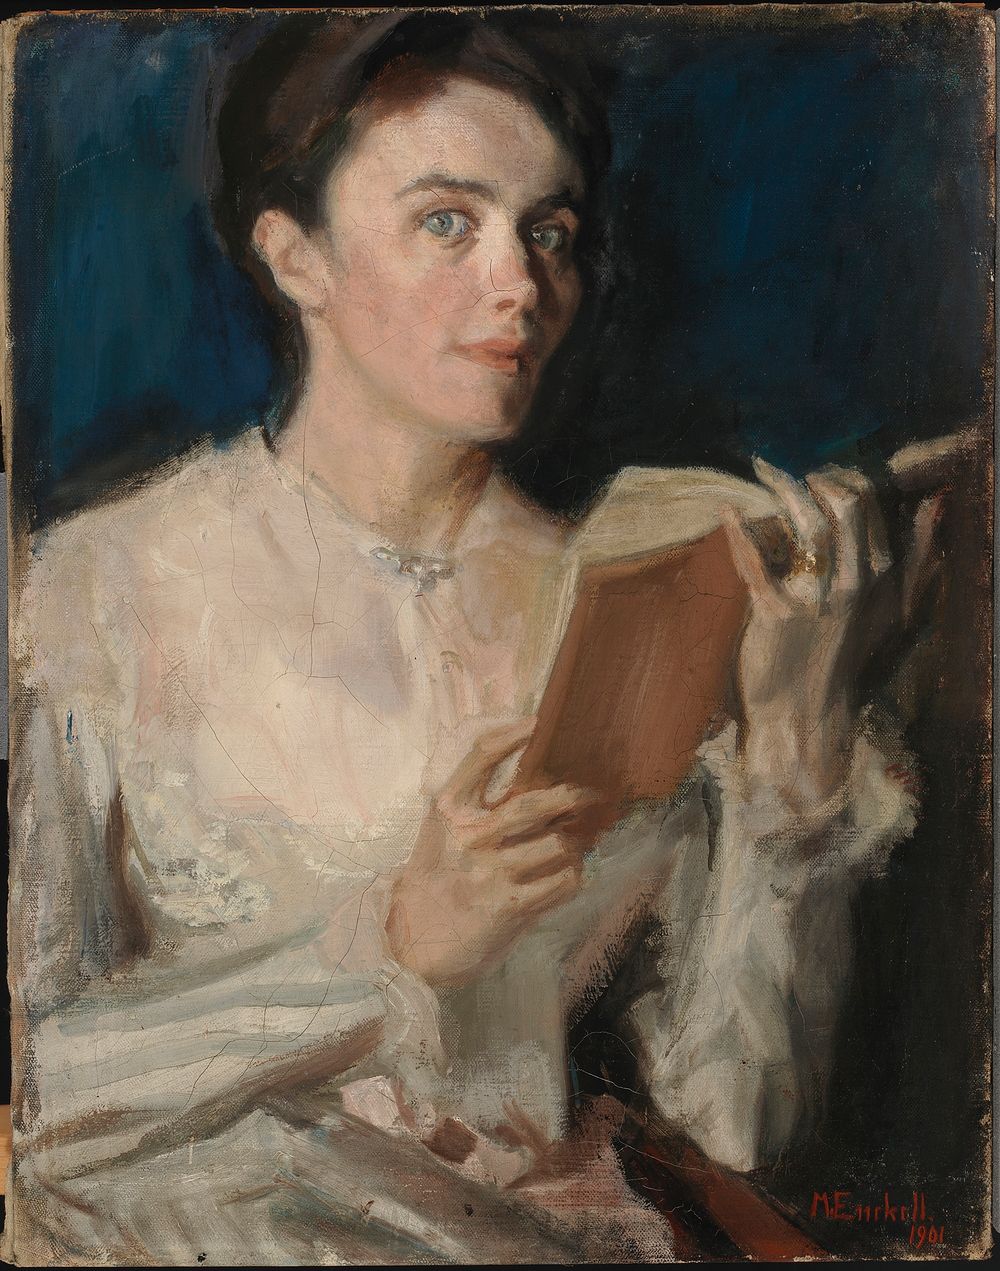 Portrait of mrs e. gadolin-lagervall, 1901 by Magnus Enckell